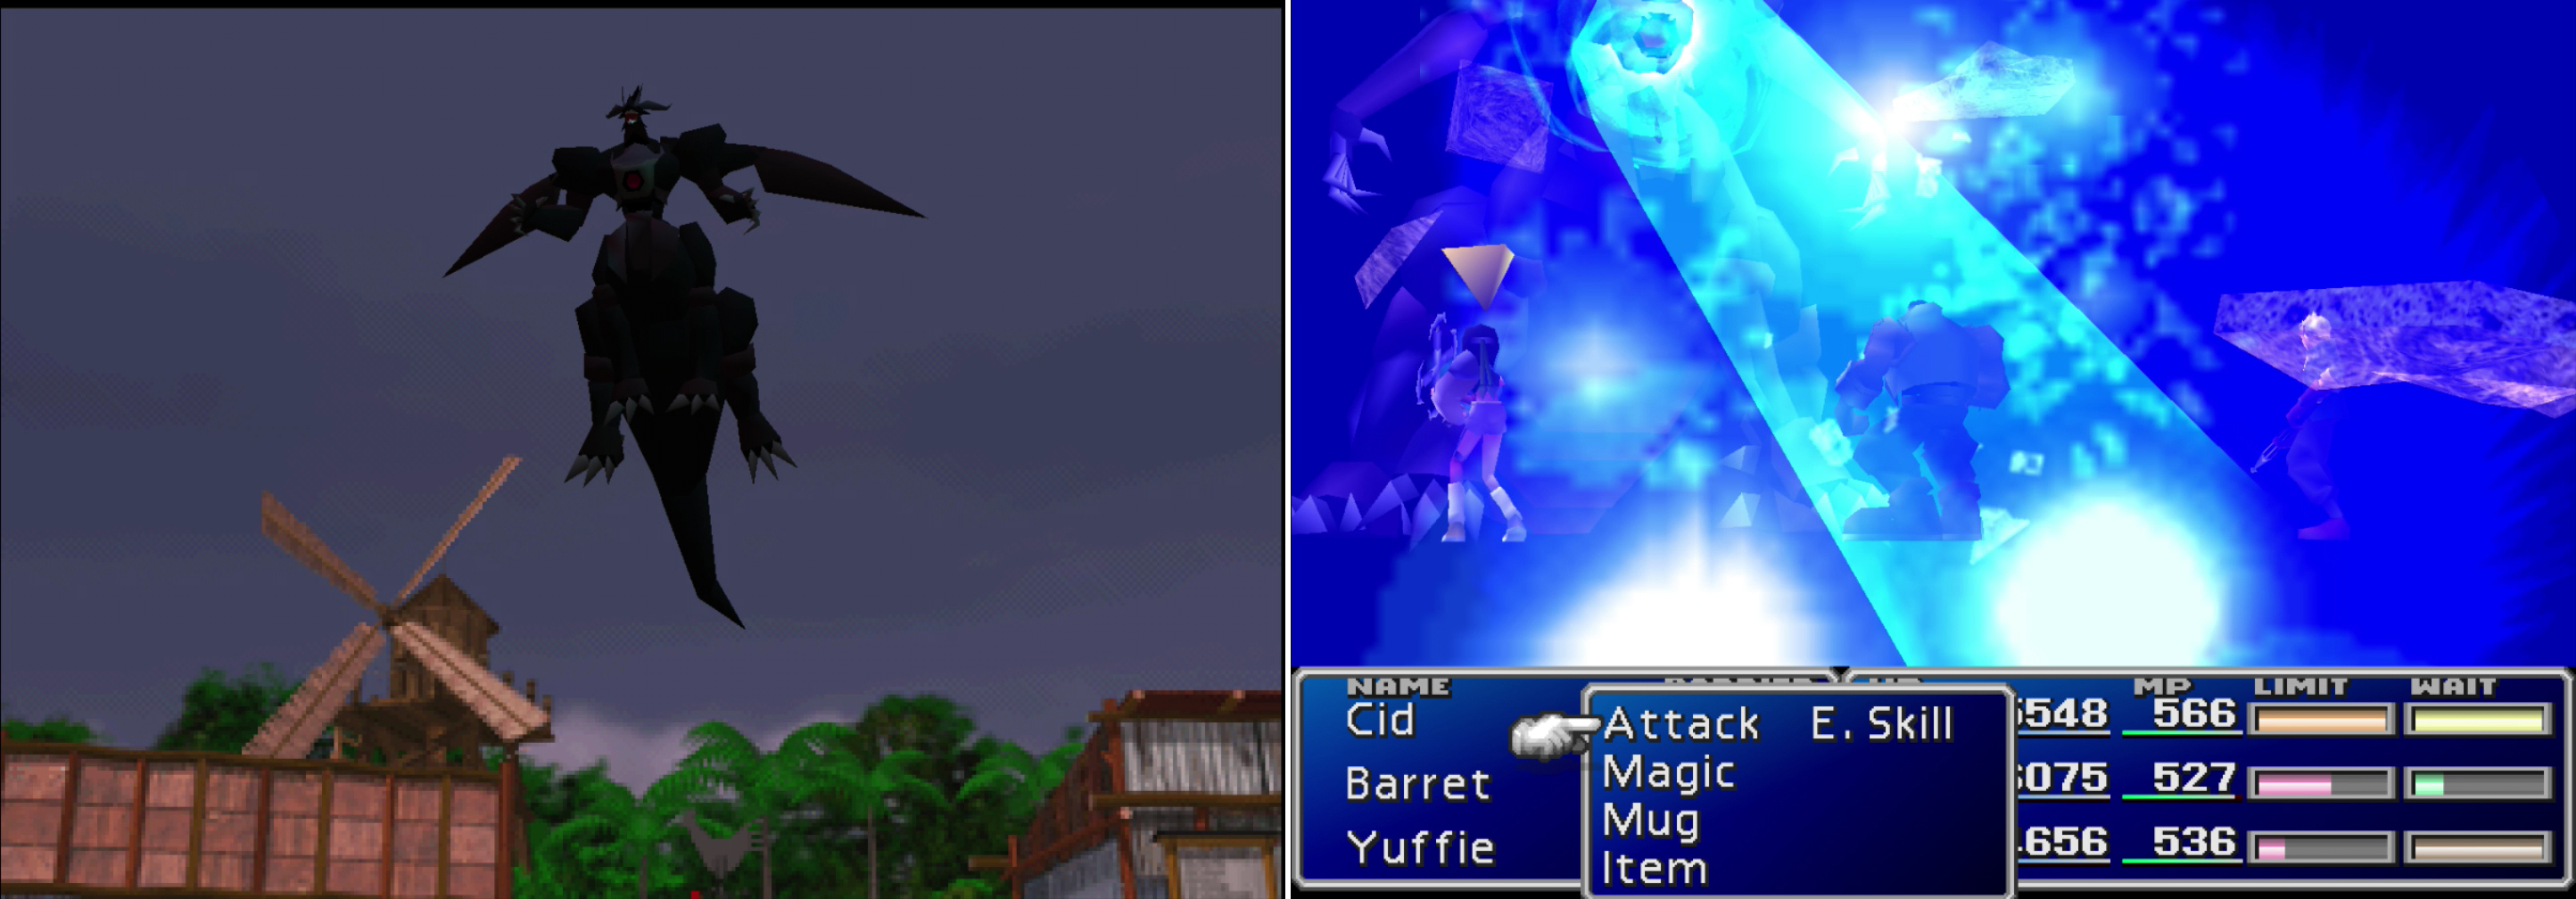 As the Lifestream threatens to erupt, Ultimate Weapon shows up to complicate matters (left). His “Ultima Beam” is fairly powerful, but Ultimate Weapon’s heart isn’t in this fight (right).